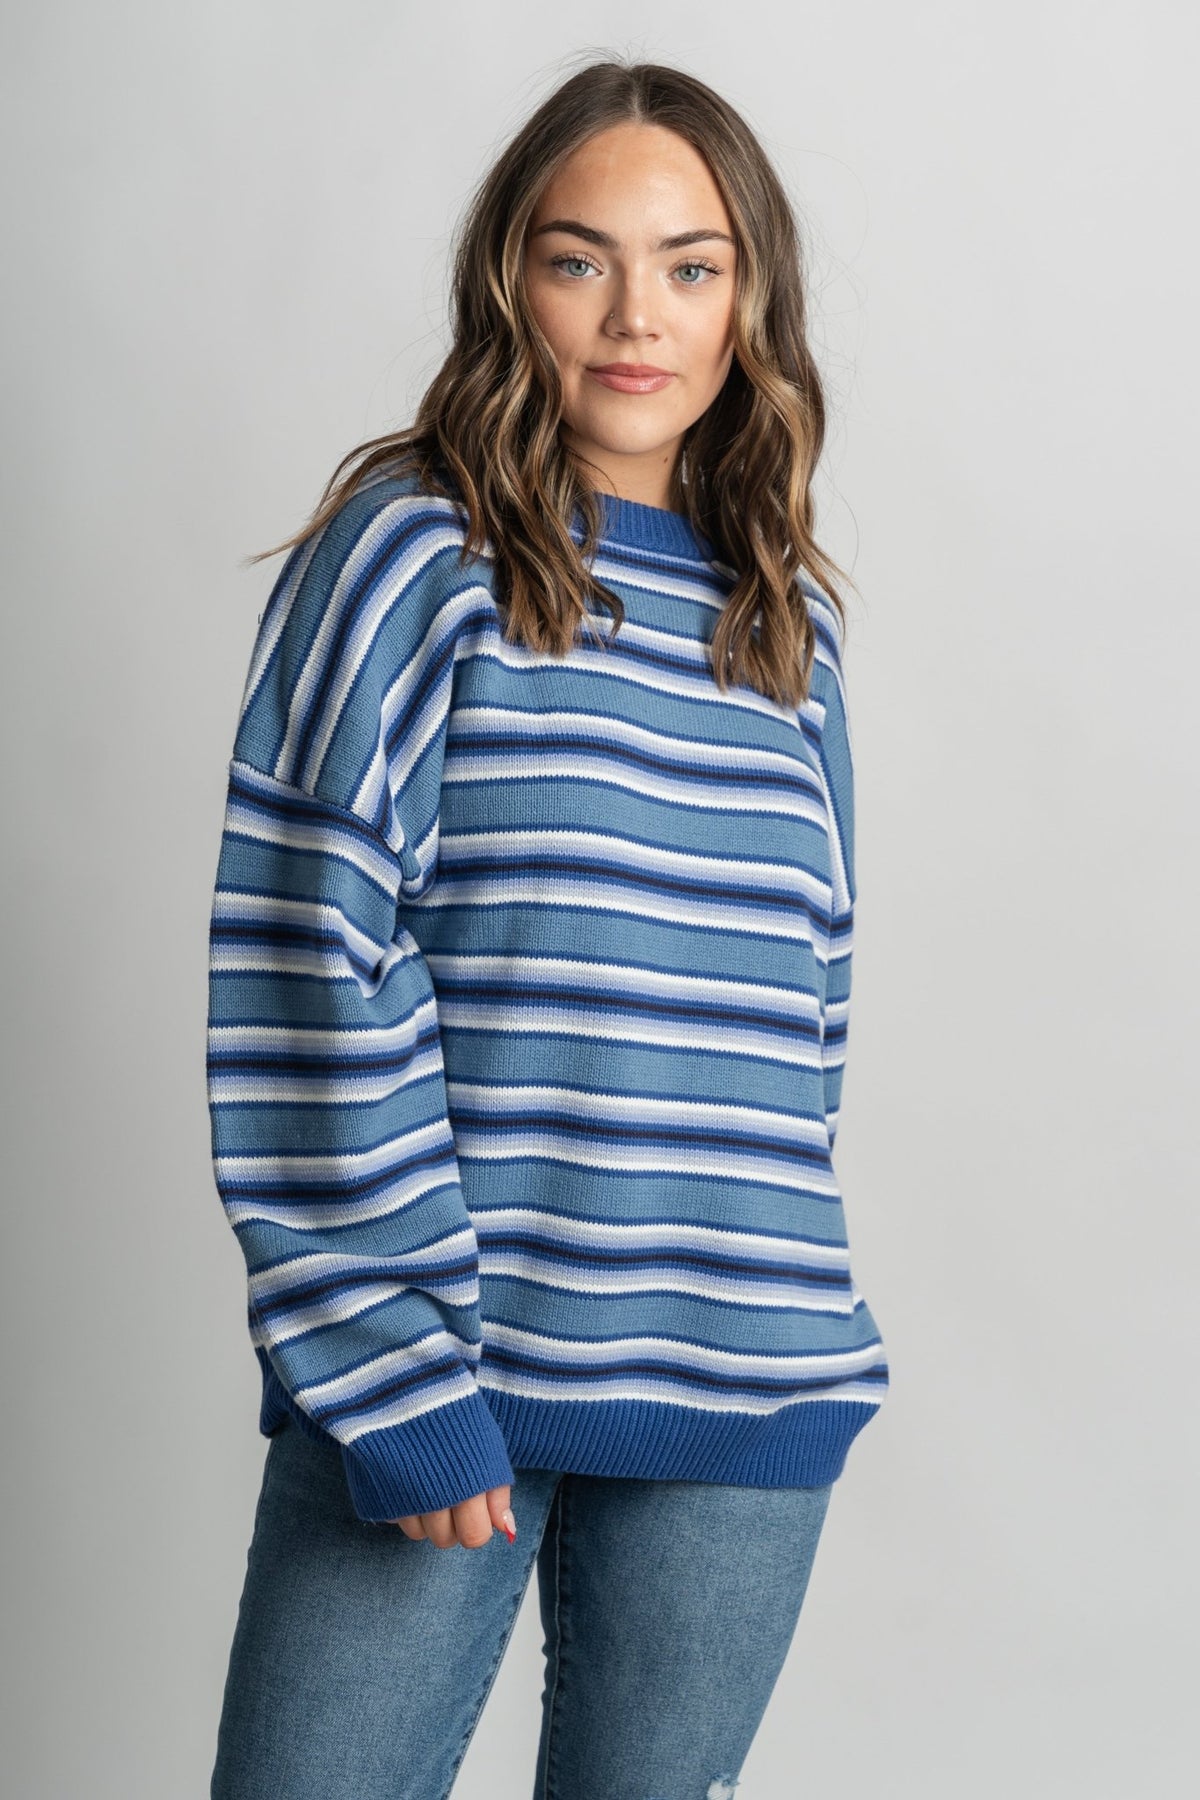 Striped oversized sweater blue multi – Boutique Sweaters | Fashionable Sweaters at Lush Fashion Lounge Boutique in Oklahoma City